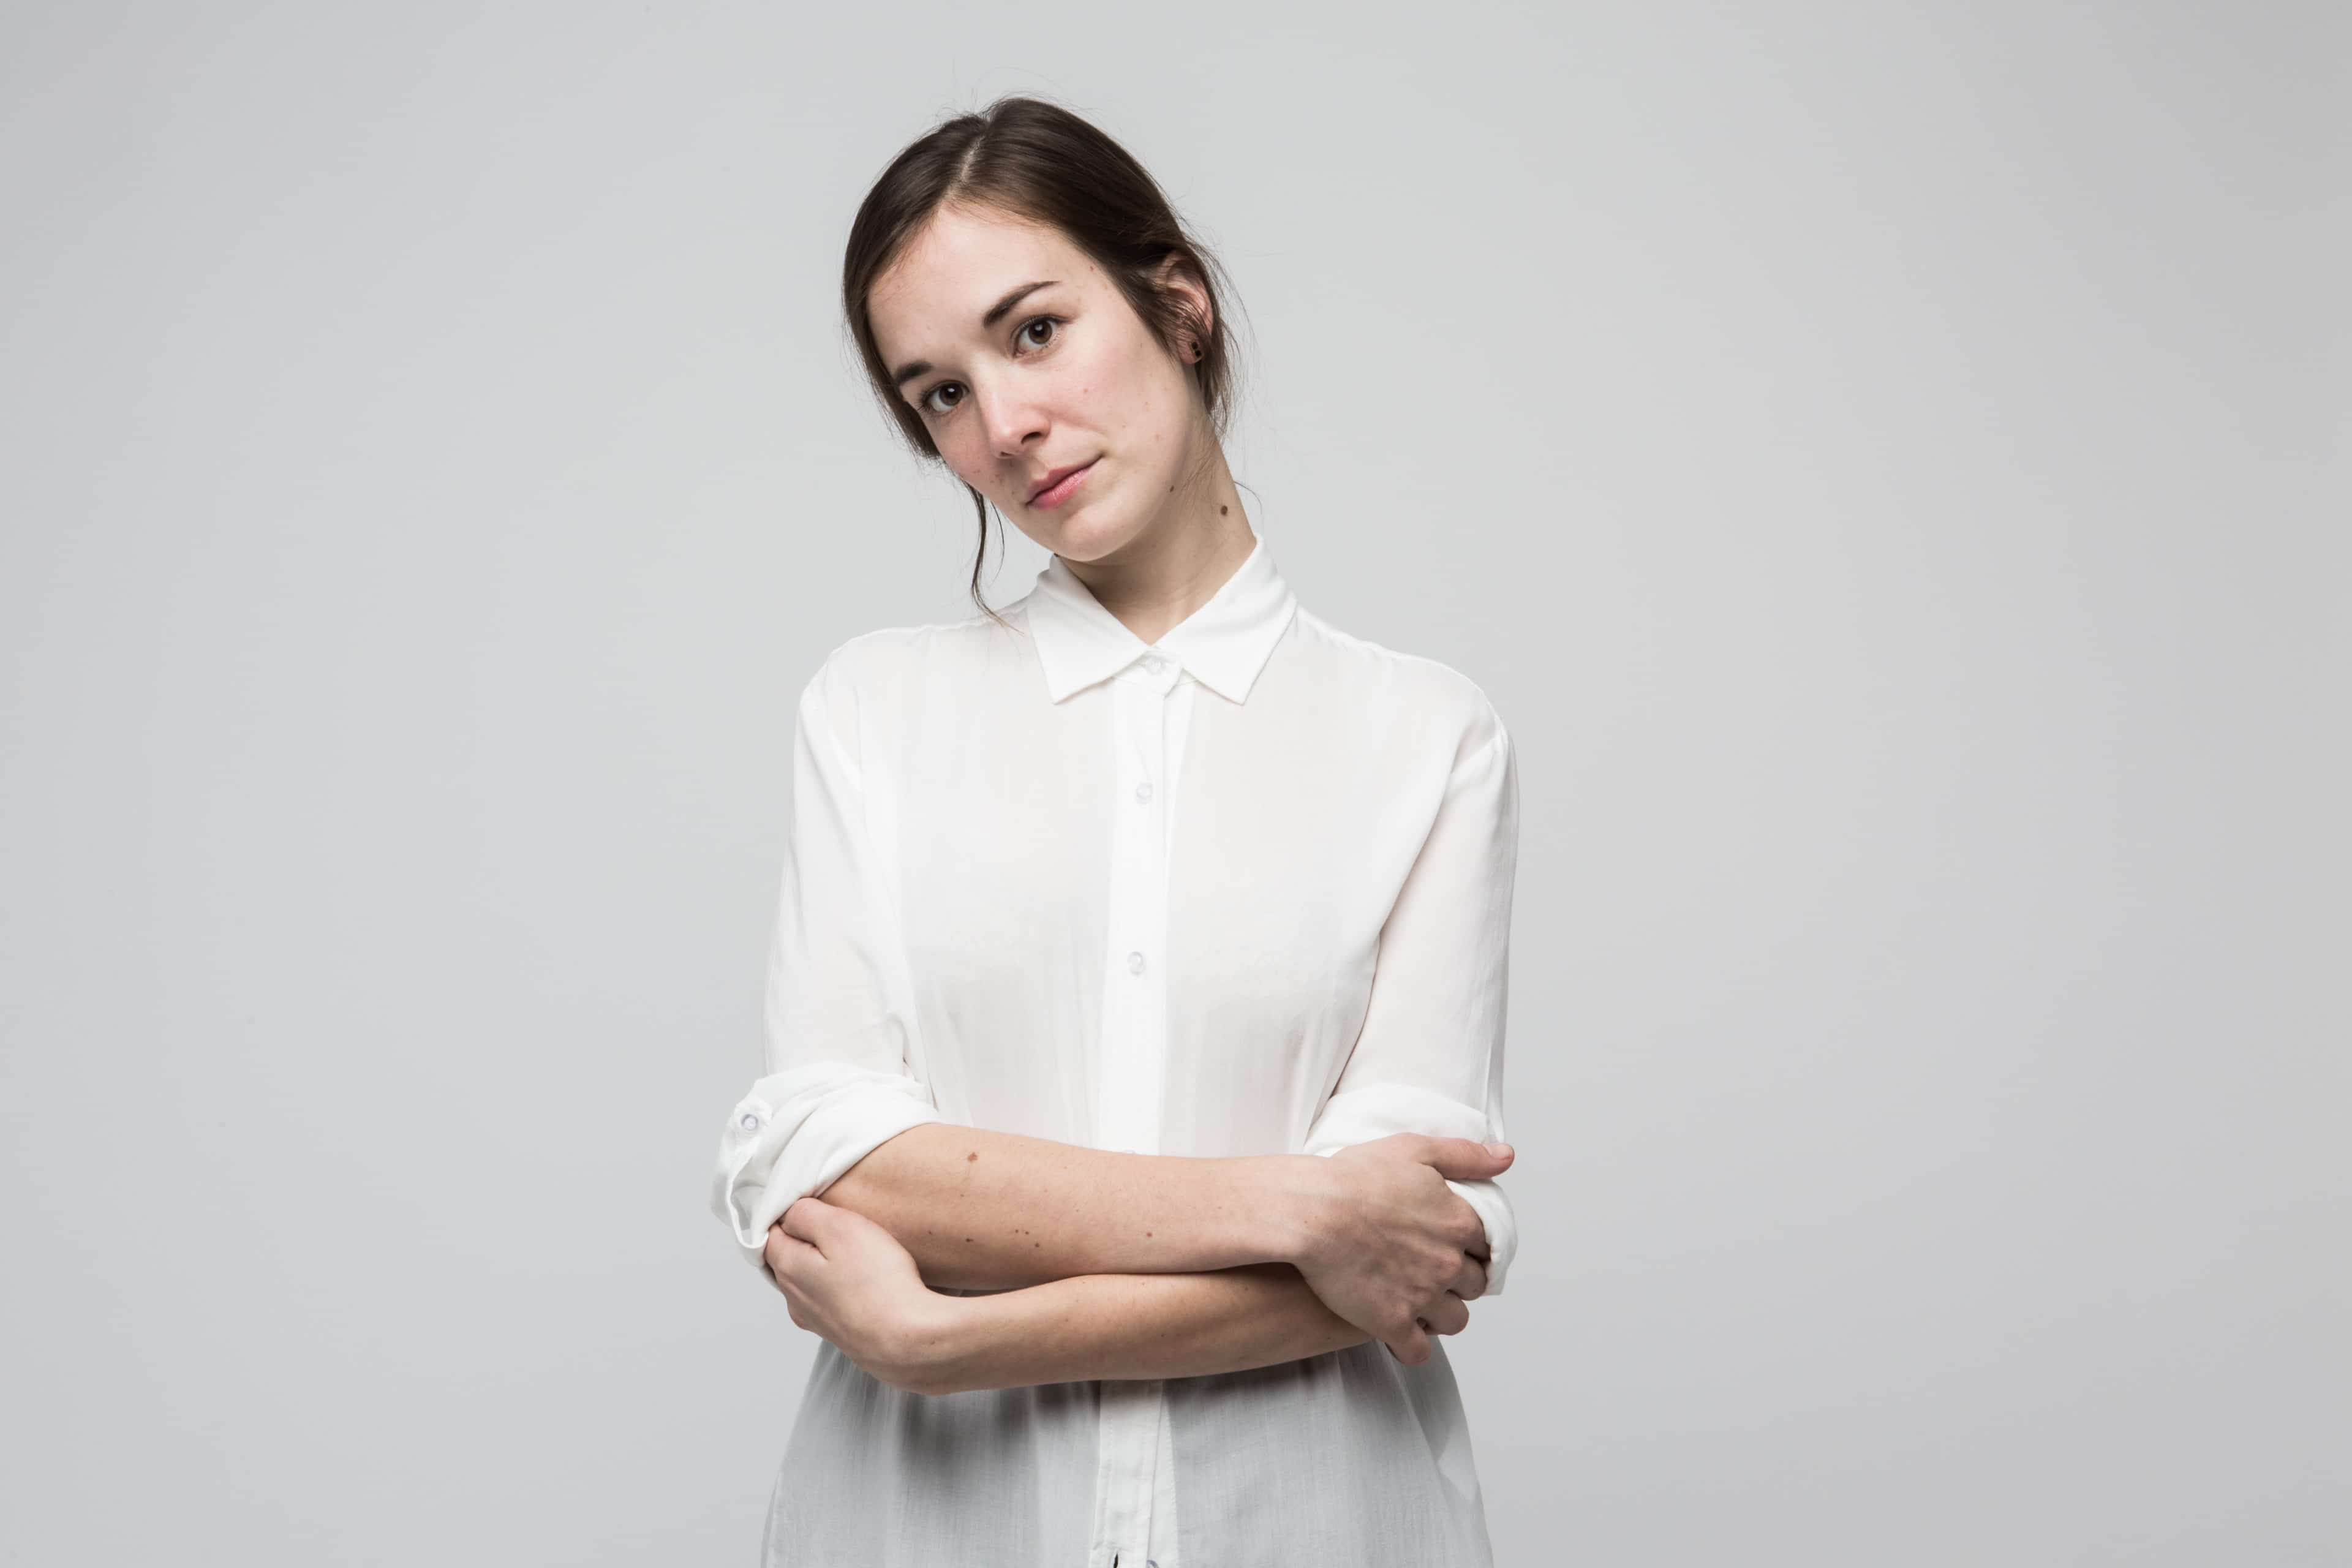 Margaret Glaspy Sings The Monochromatic Blues In “You and I” Video